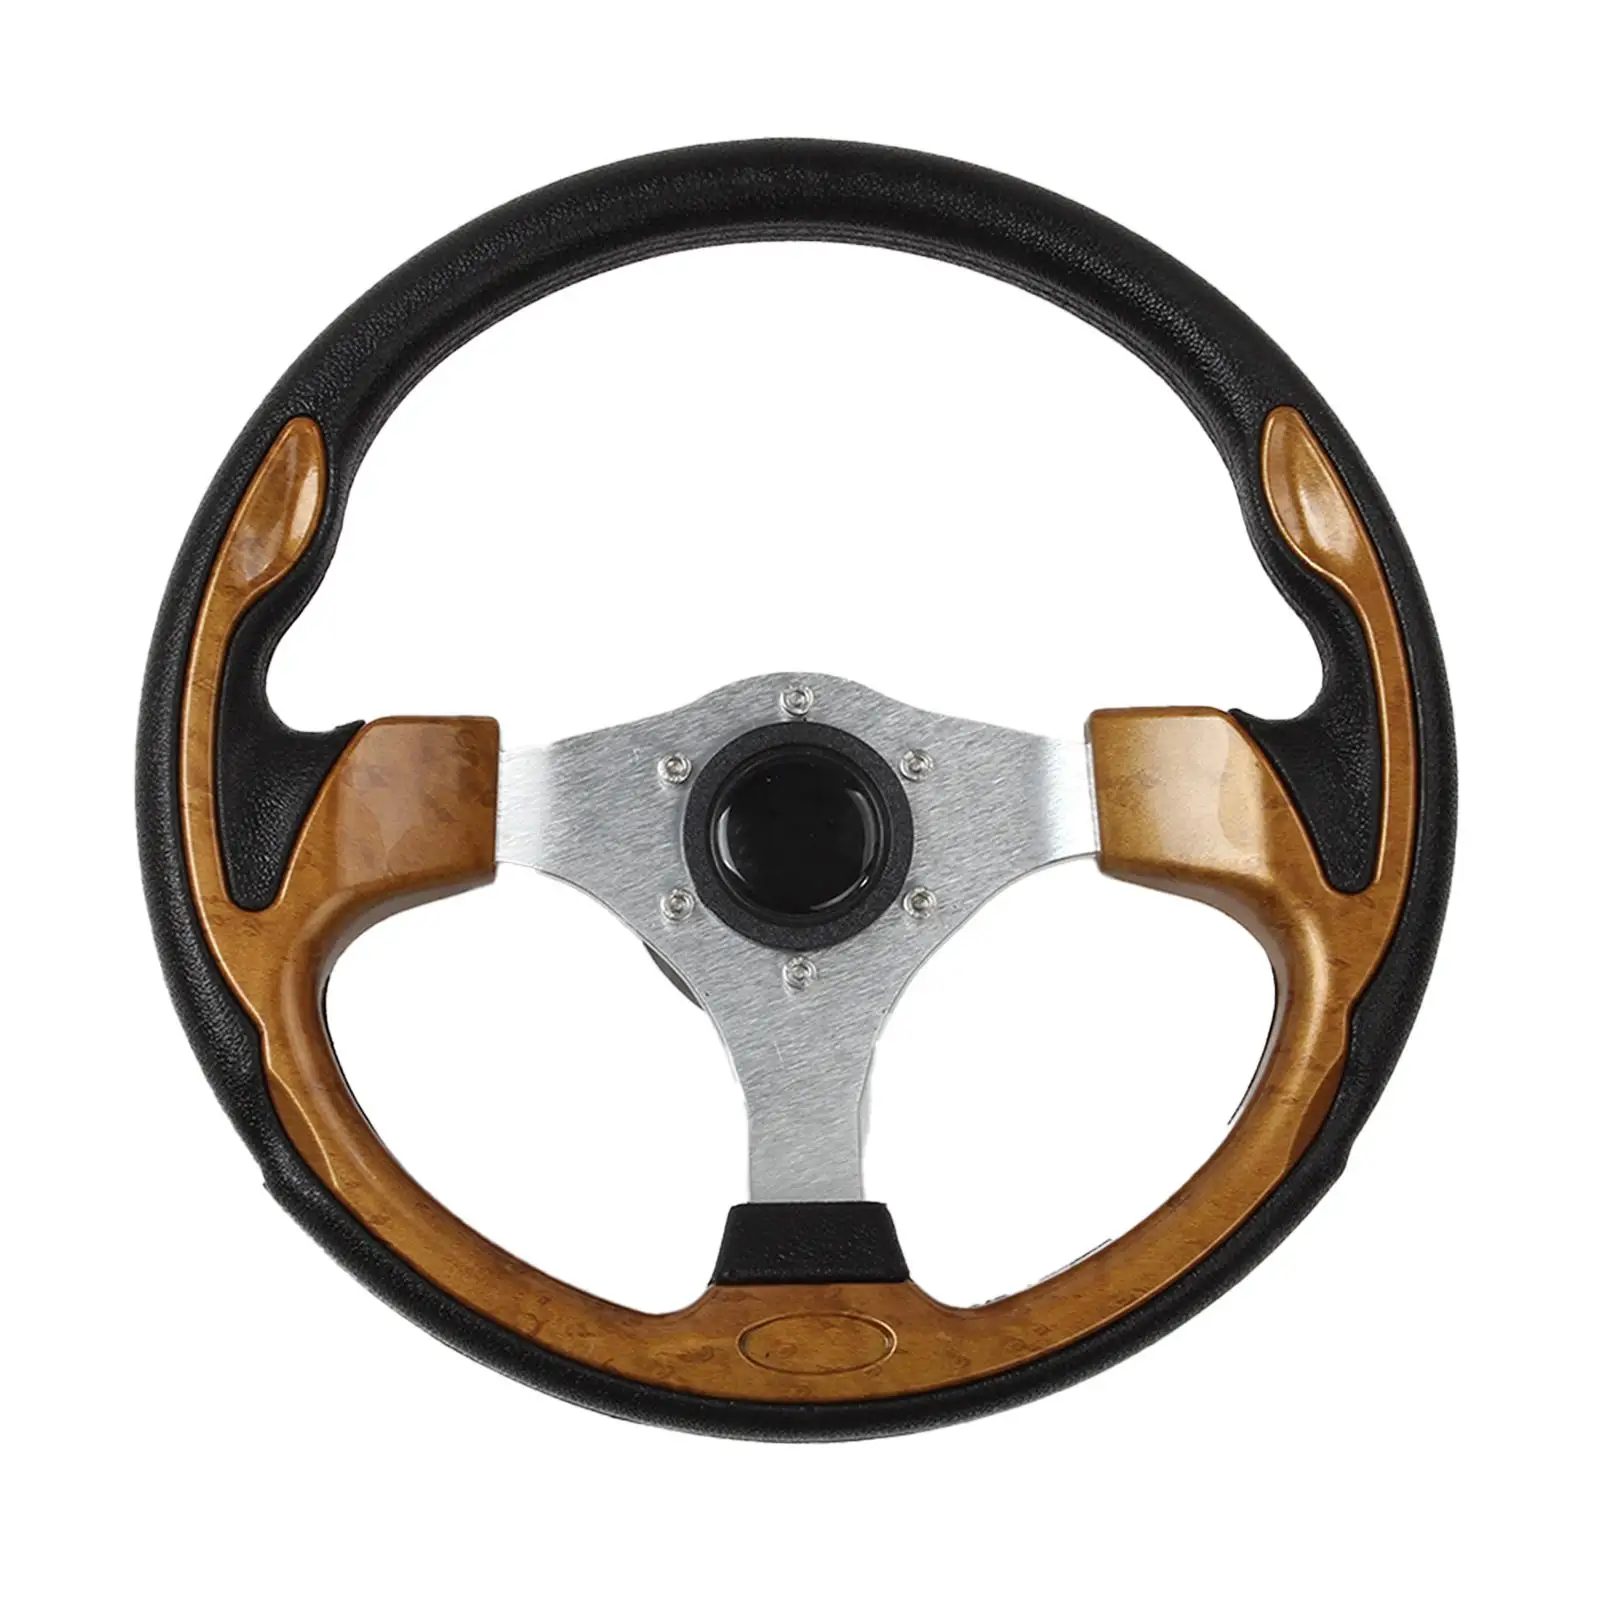 Marine Boat Steering Wheel Fine Workmanship Convenient Assemble Accessory Durable 3 Spoke for Marine Boats Yachts Devices